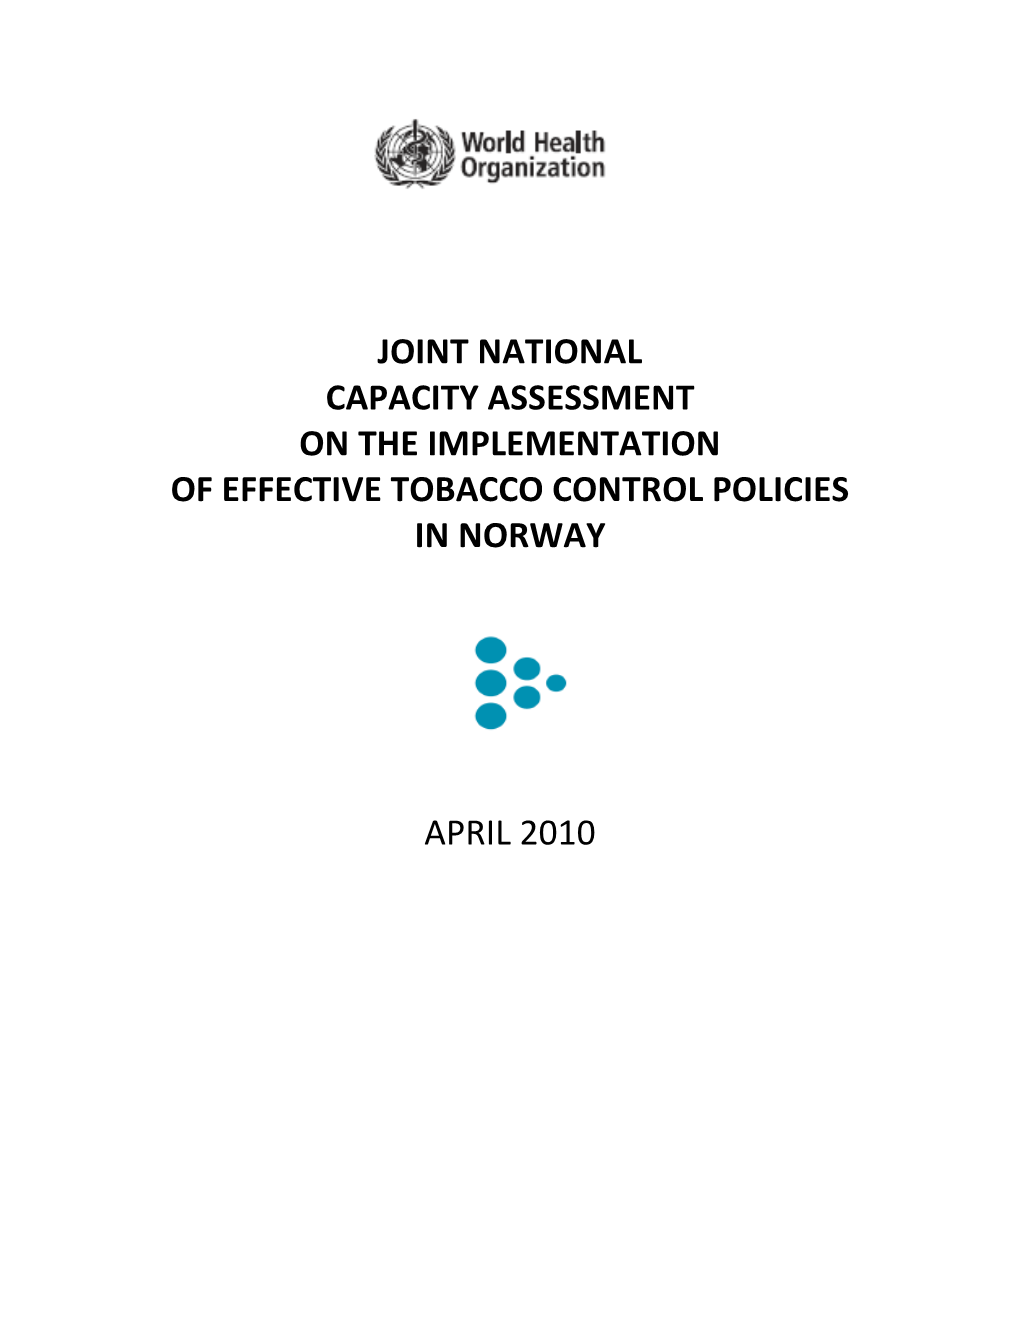 Joint National Capacity Assessment on the Implementation of Effective Tobacco Control Policies in Norway